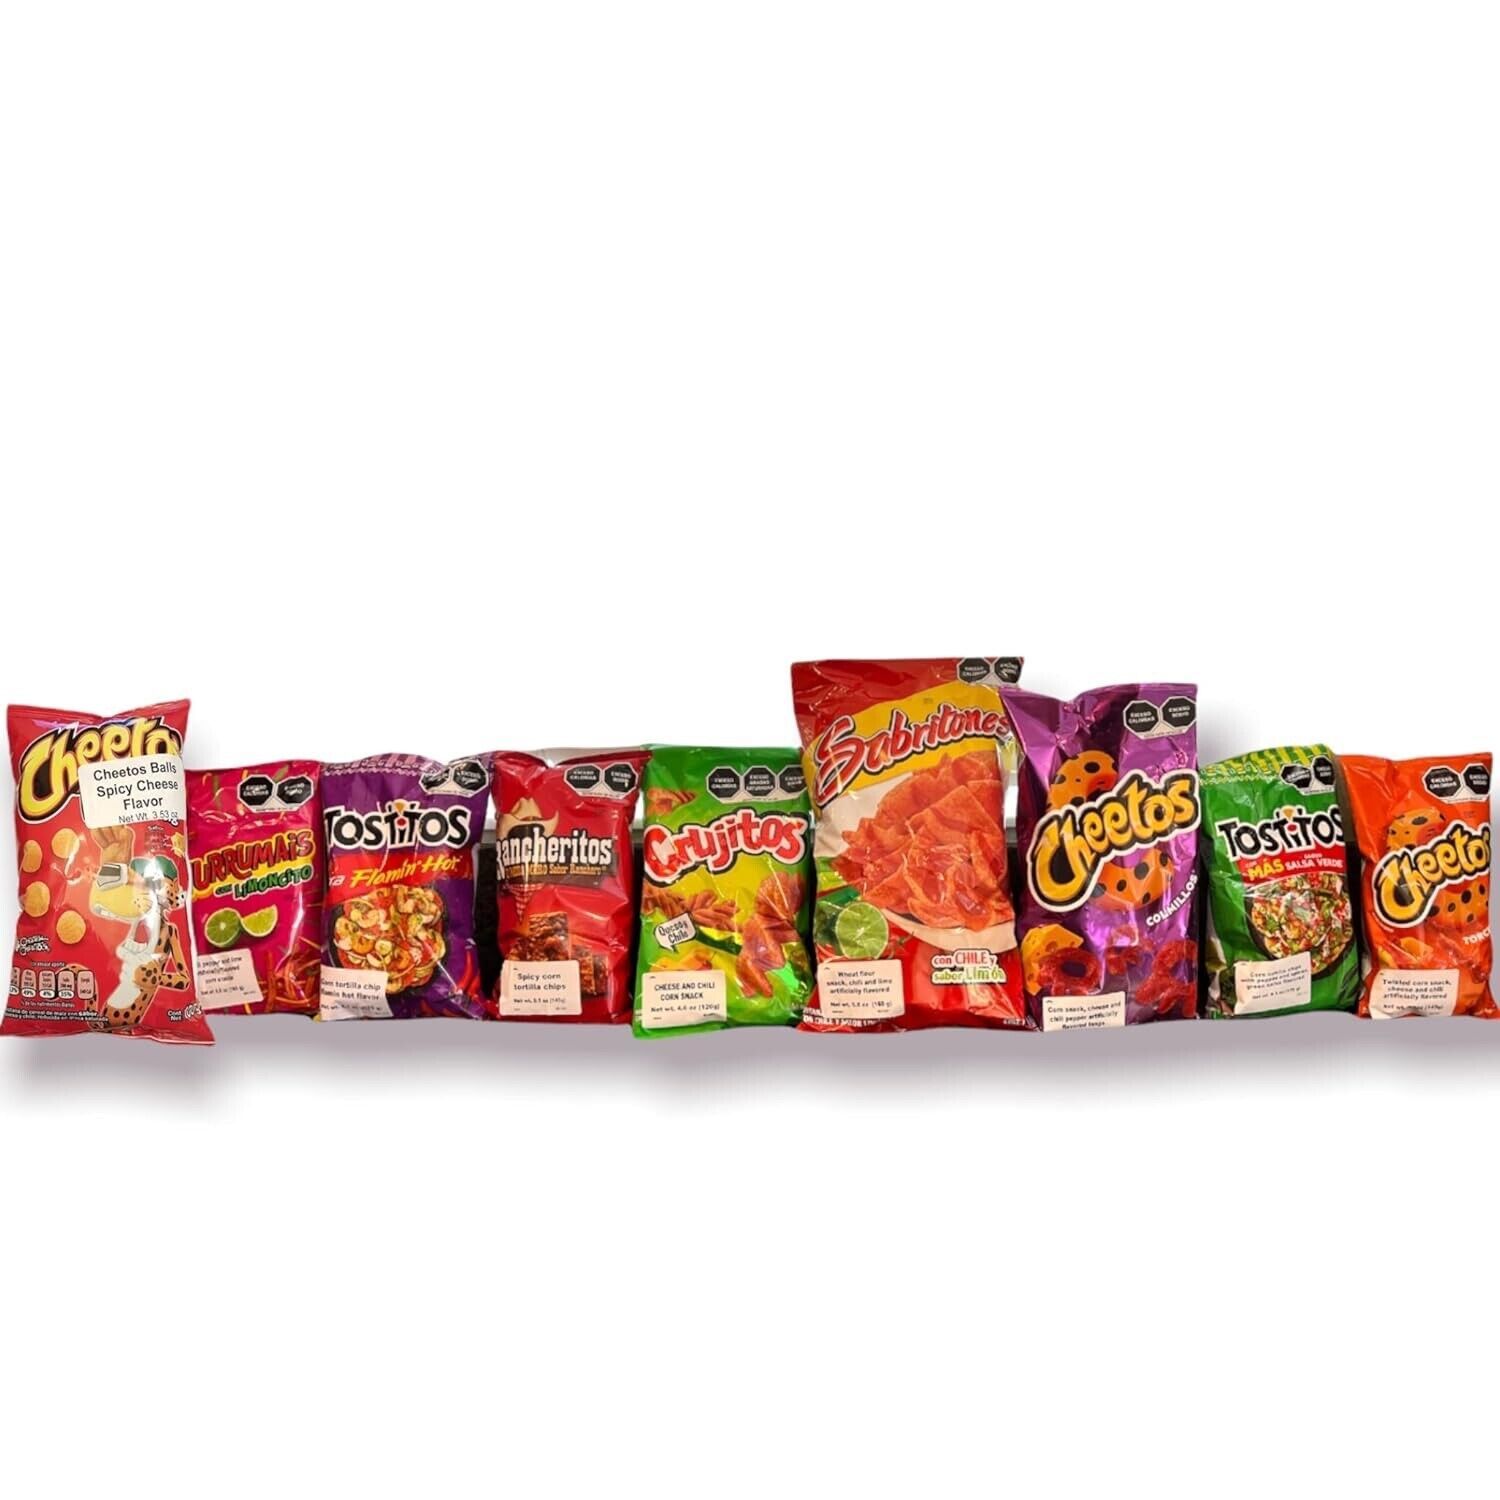 6 bags of Cheetos Crunchy Flamin' Hot Cheese Flavored Snack Chips 285g Each